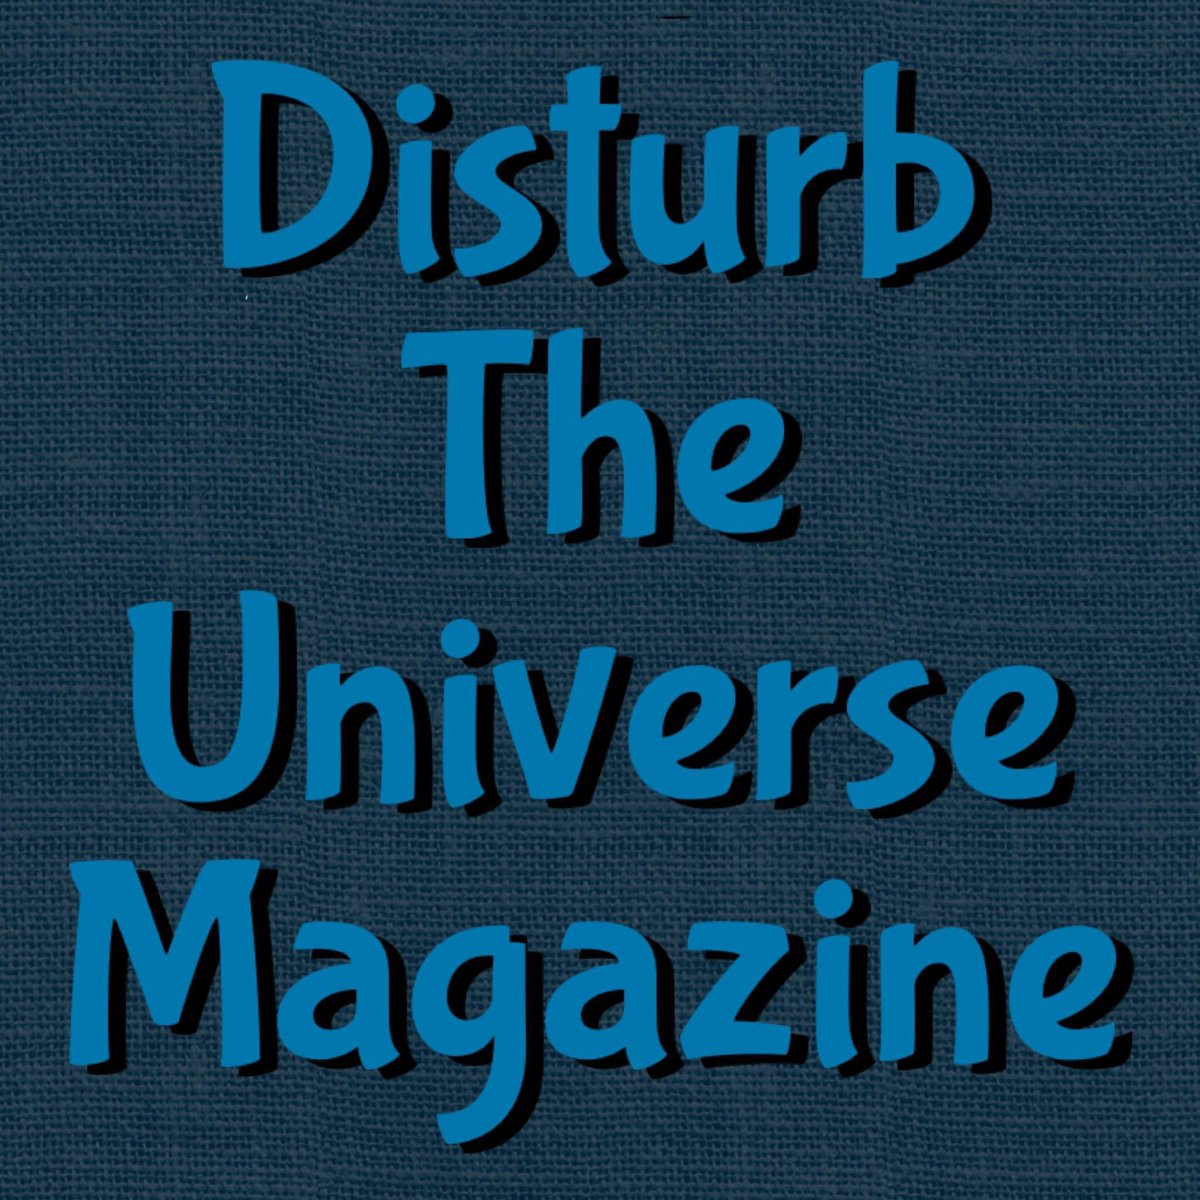 Up today at Disturb The Universe Magazine 

Hot Day by John Winfield Hoppin

disturbtheuniversemagazine.com/2024/04/hot-da…

#publishedwriting #disturbtheuniversemagazine #published #writingcommunity #poetry #writing #publishedpoetry #poetrylovers #poetrytwitter #poetrycommunity